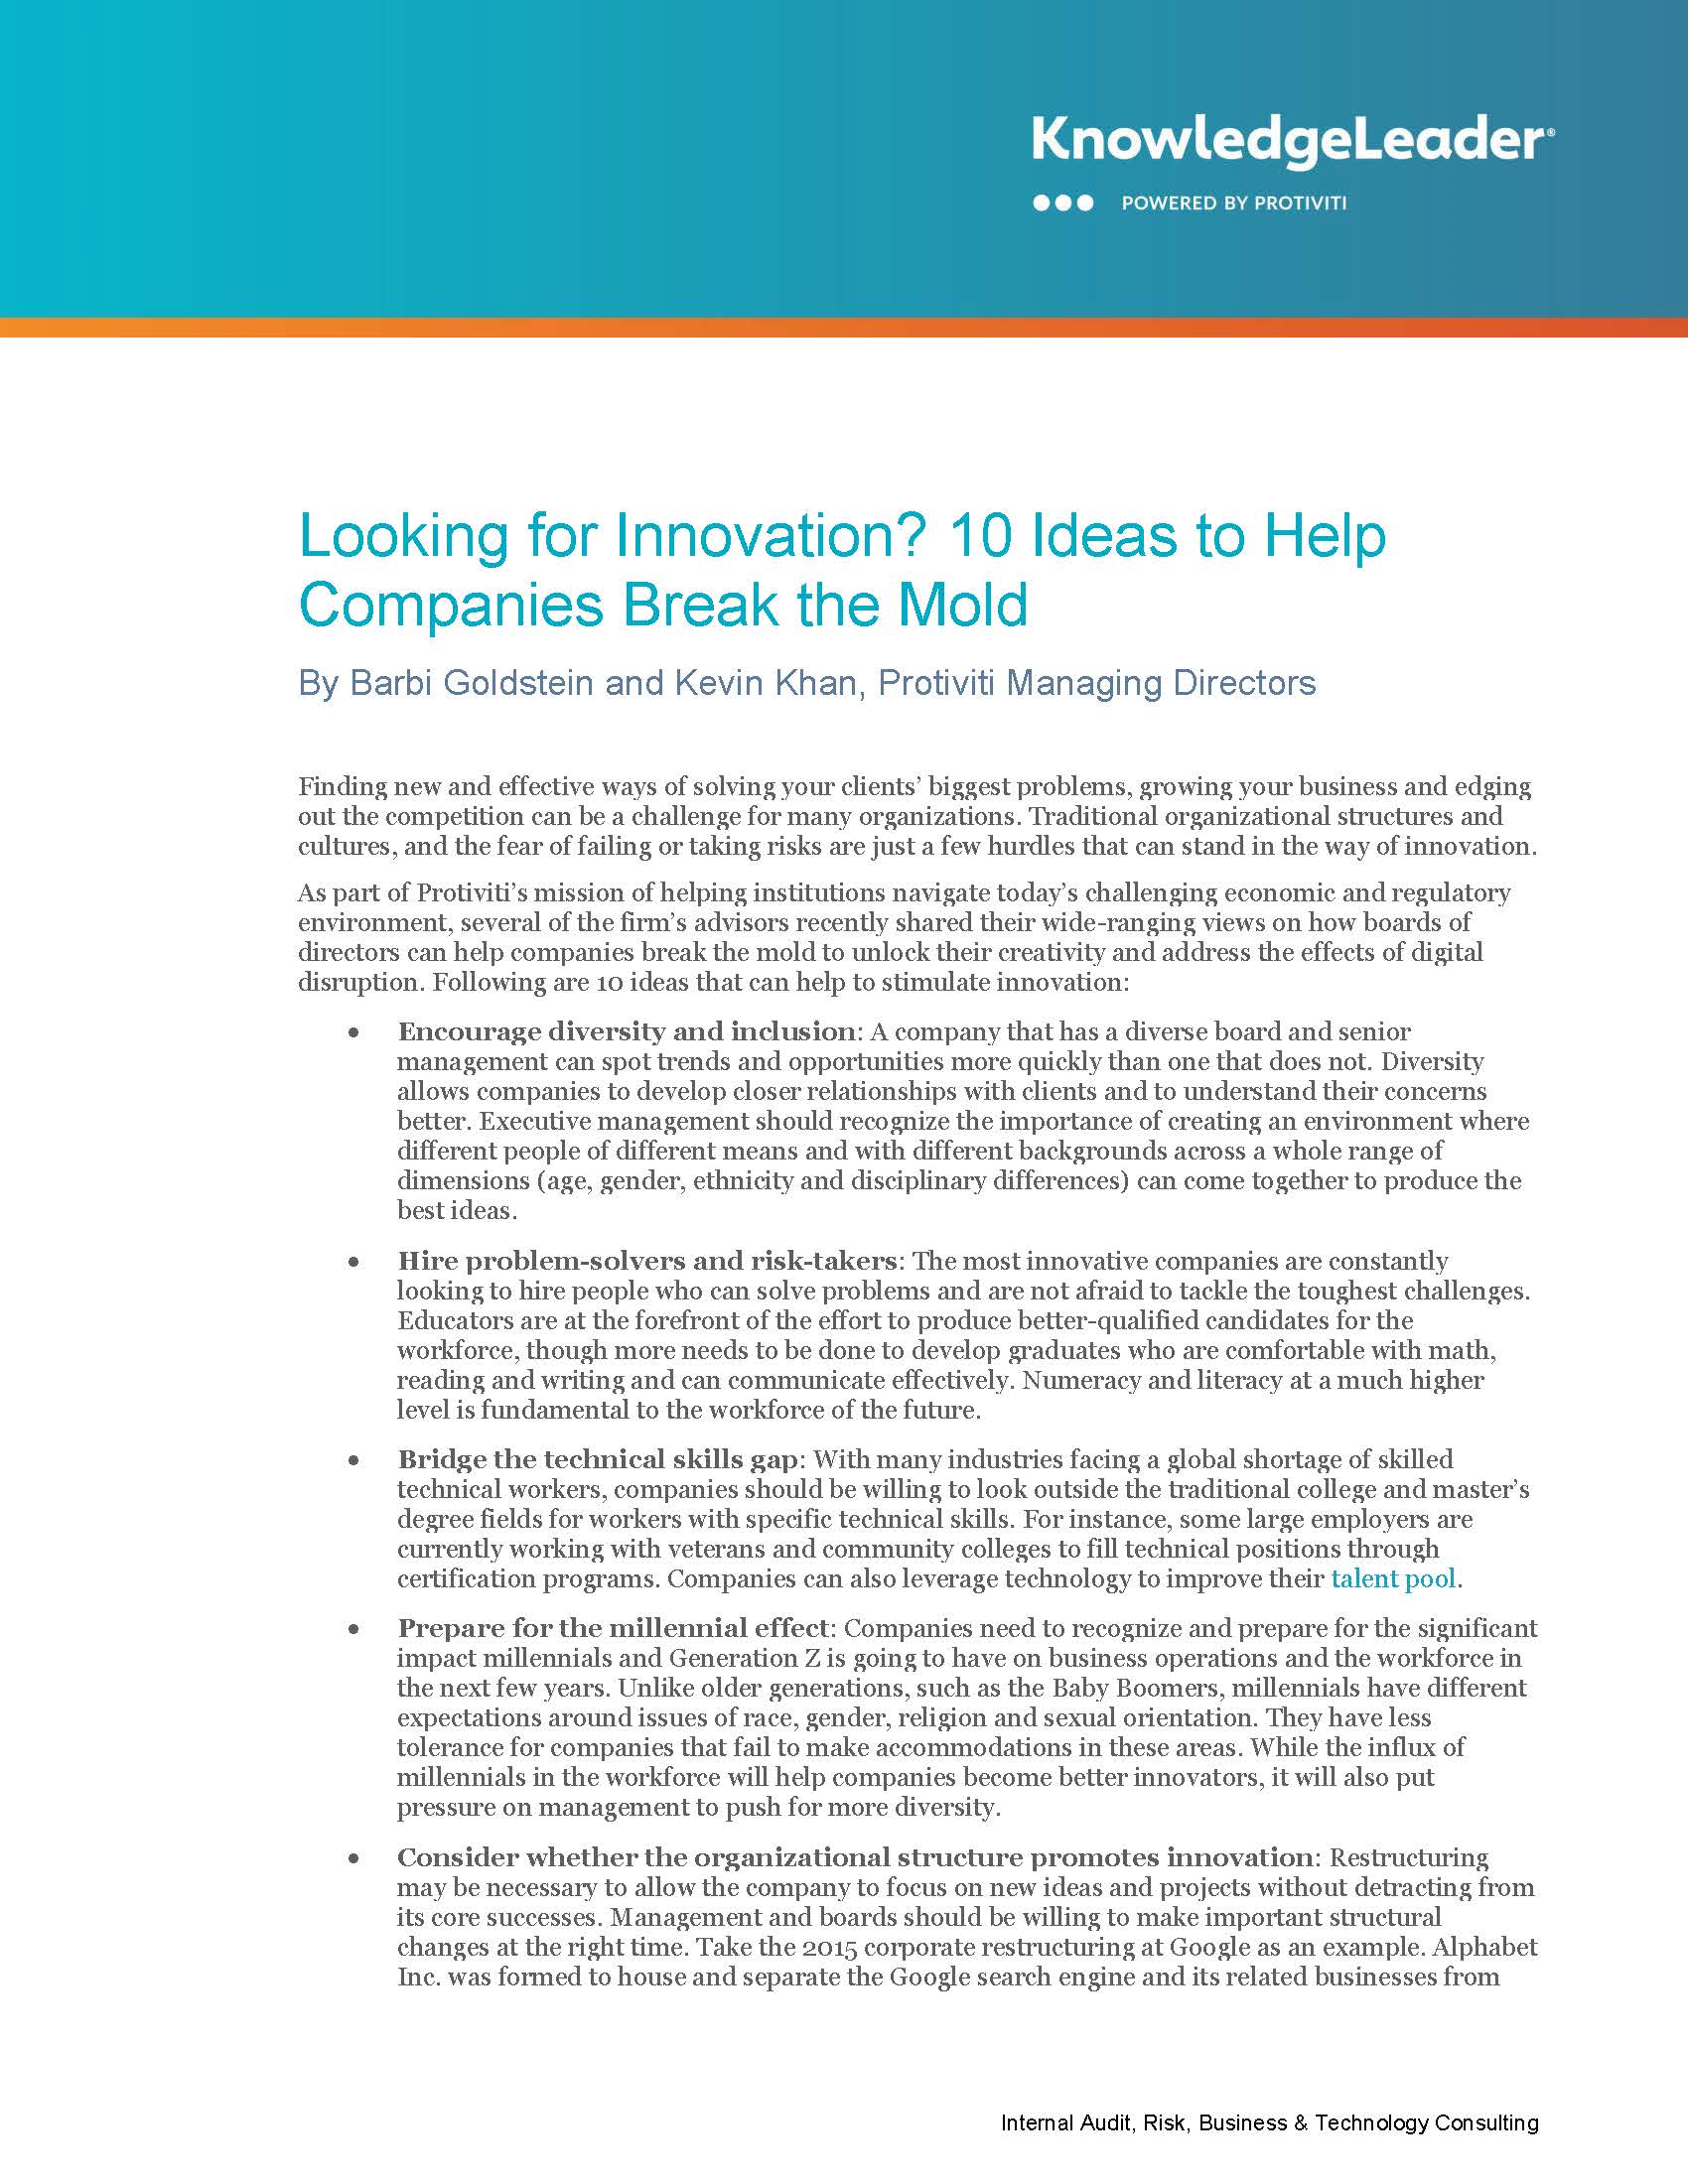 Screenshot of the first page of Looking for Innovation 10 Ideas to Help Companies Break the Mold